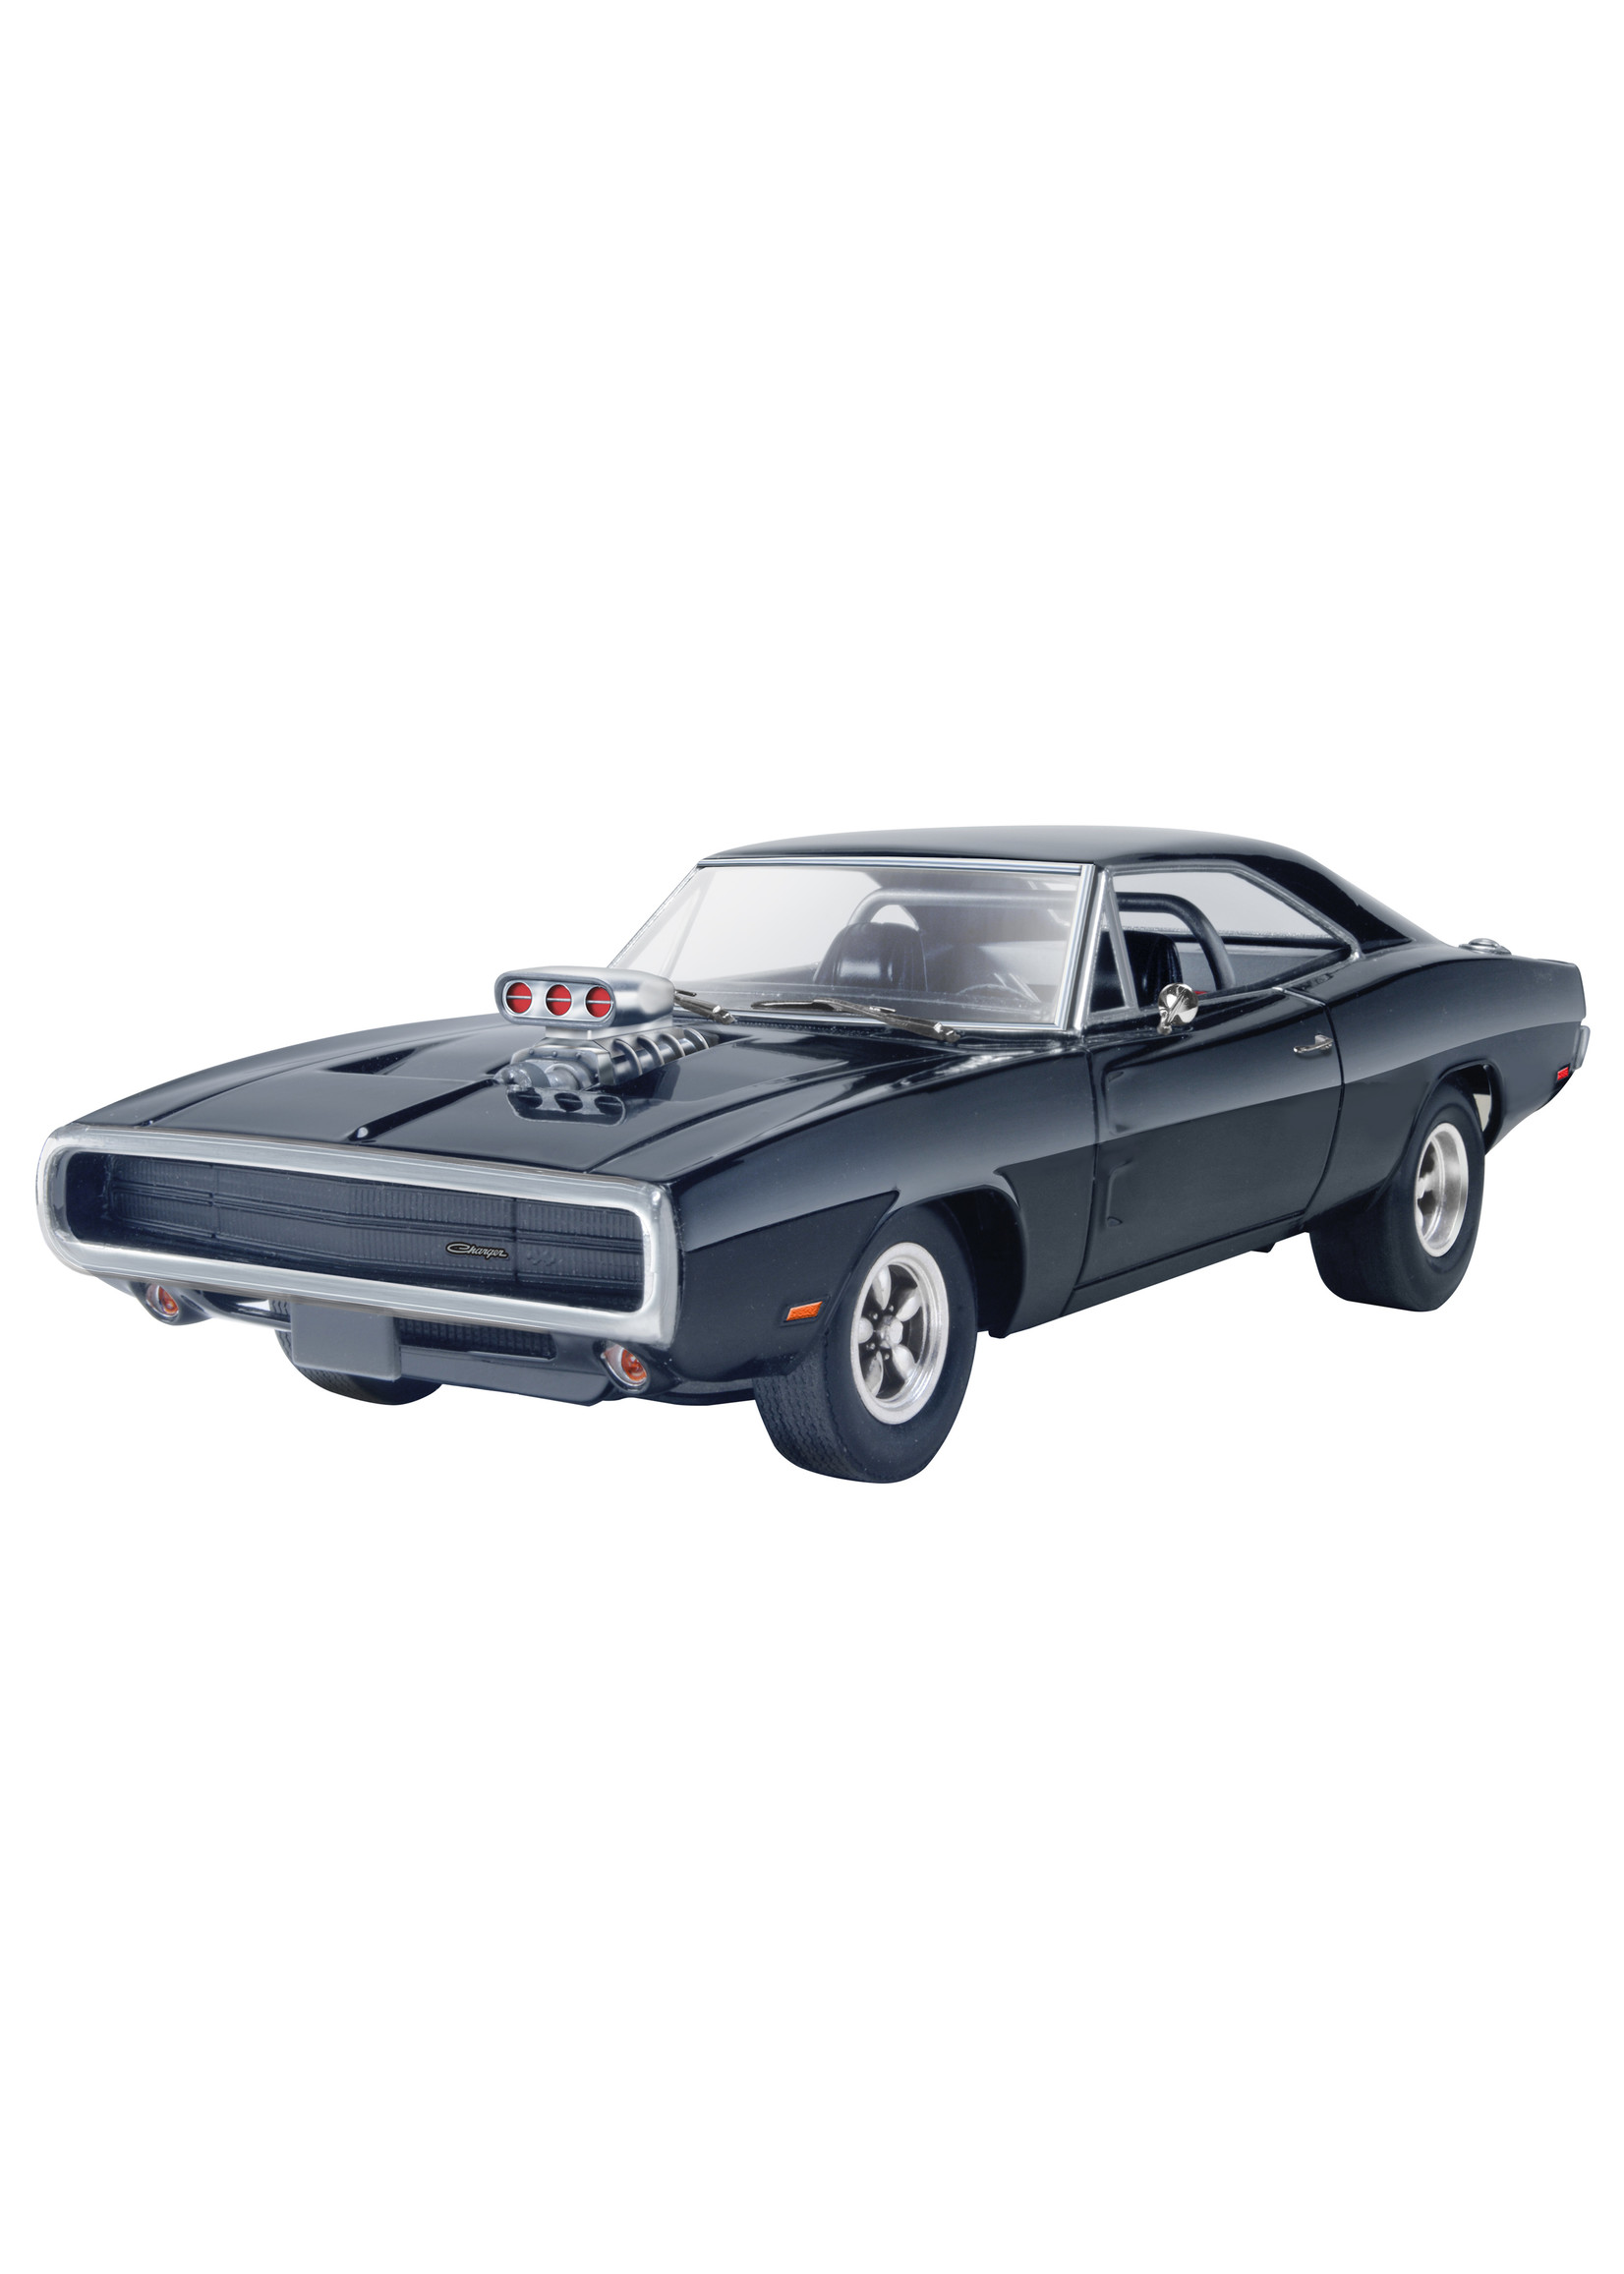 fast and furious dodge charger  1969 Dodge Charger Fast And